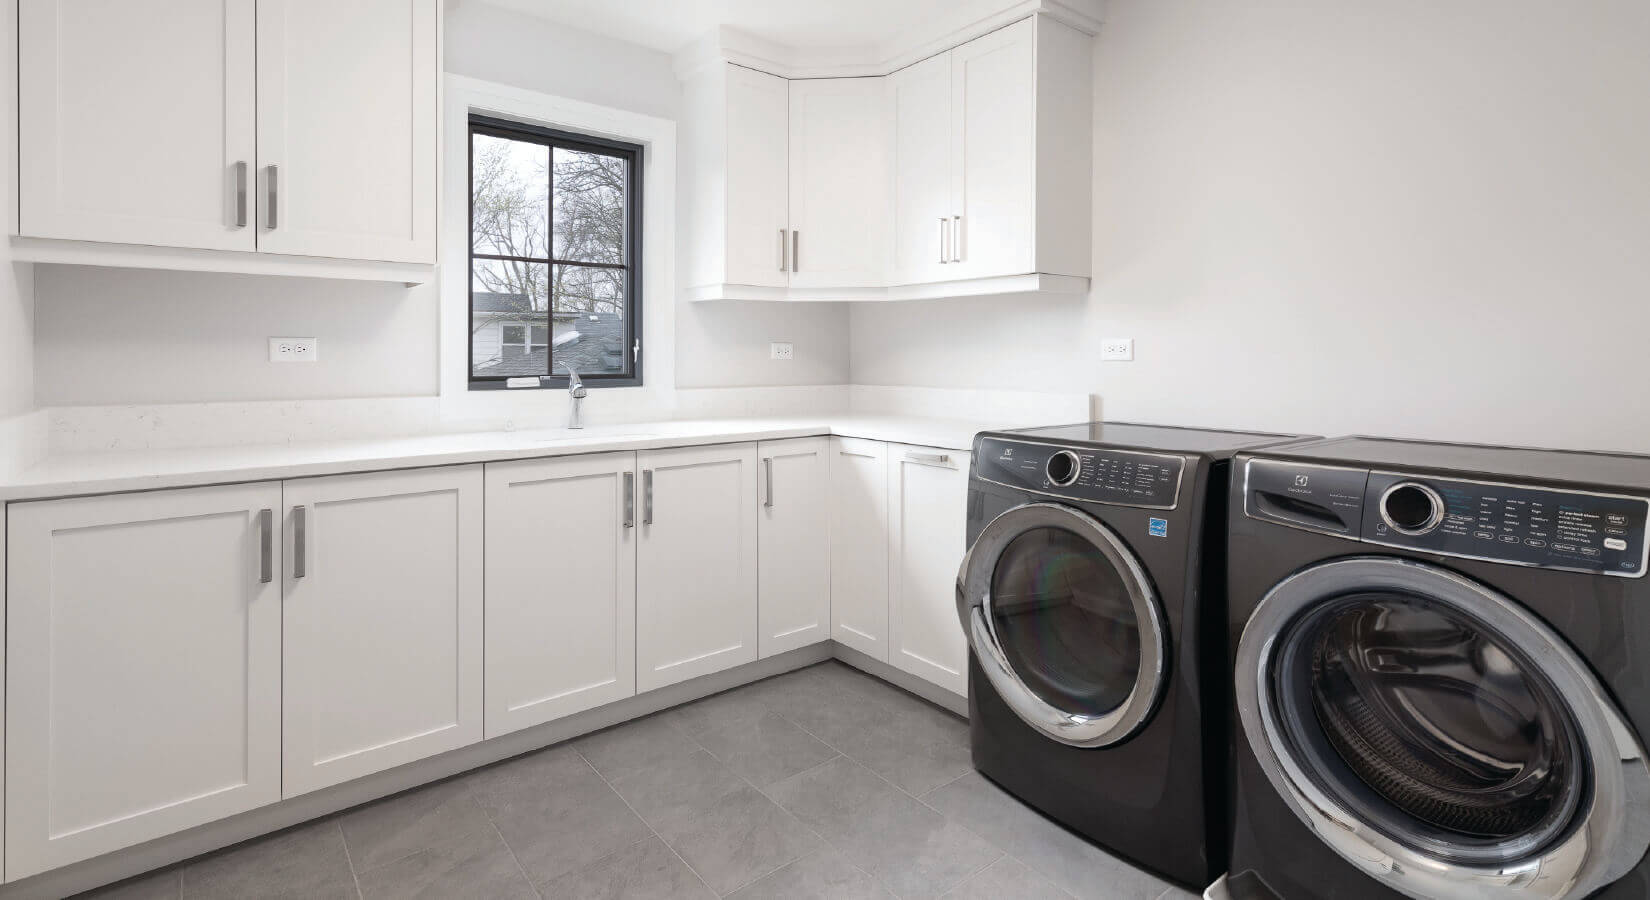 Laundry room with large white cabinets and dark gray appliances.